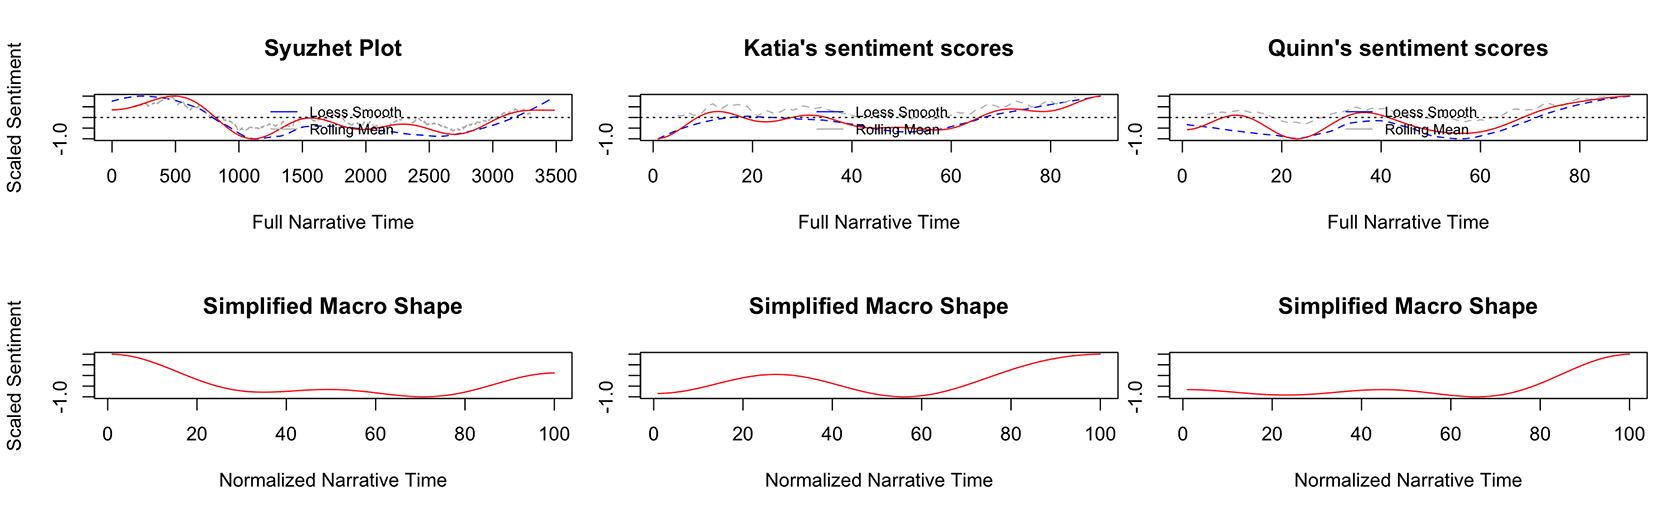 Syuzhet's two-part simple graph, and the same for Katia and Quinn's manual sentiment scores.